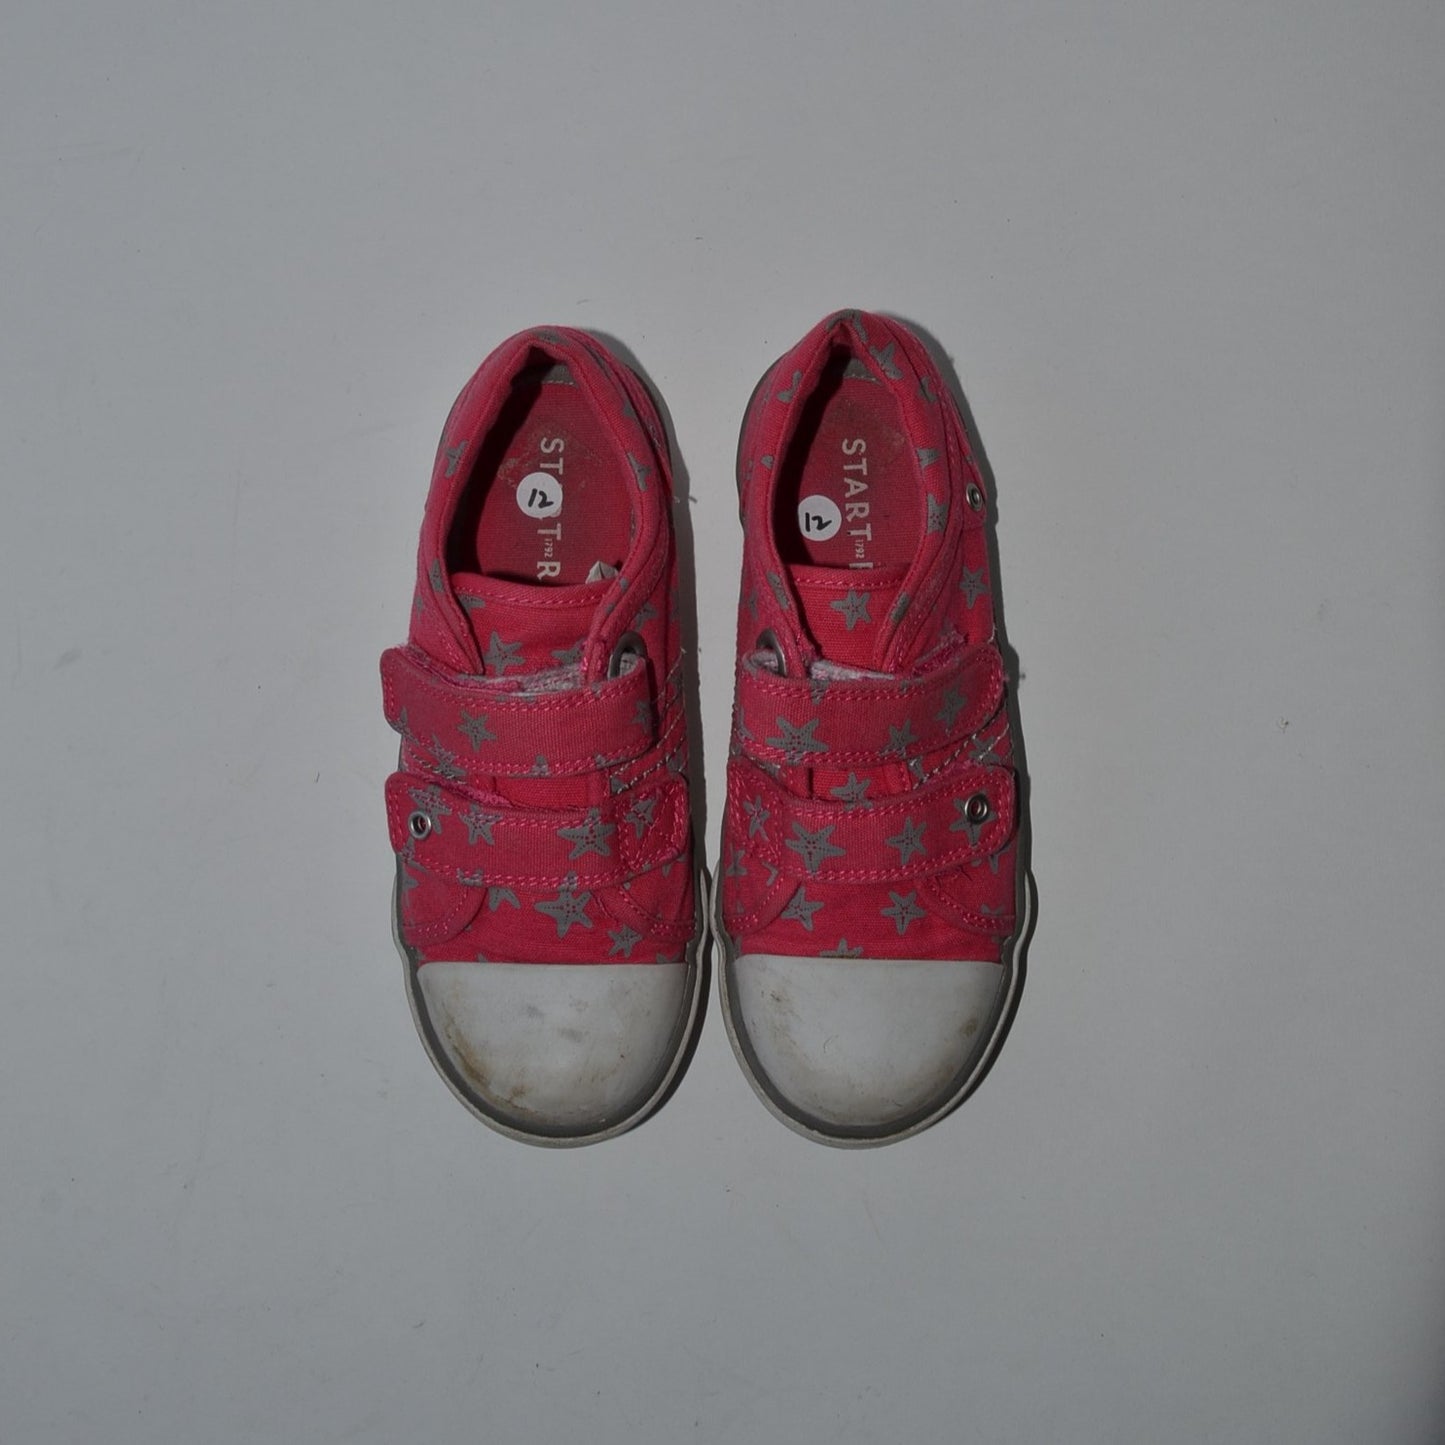 Pink Trainers with Stars Shoe Size 12 (jr)